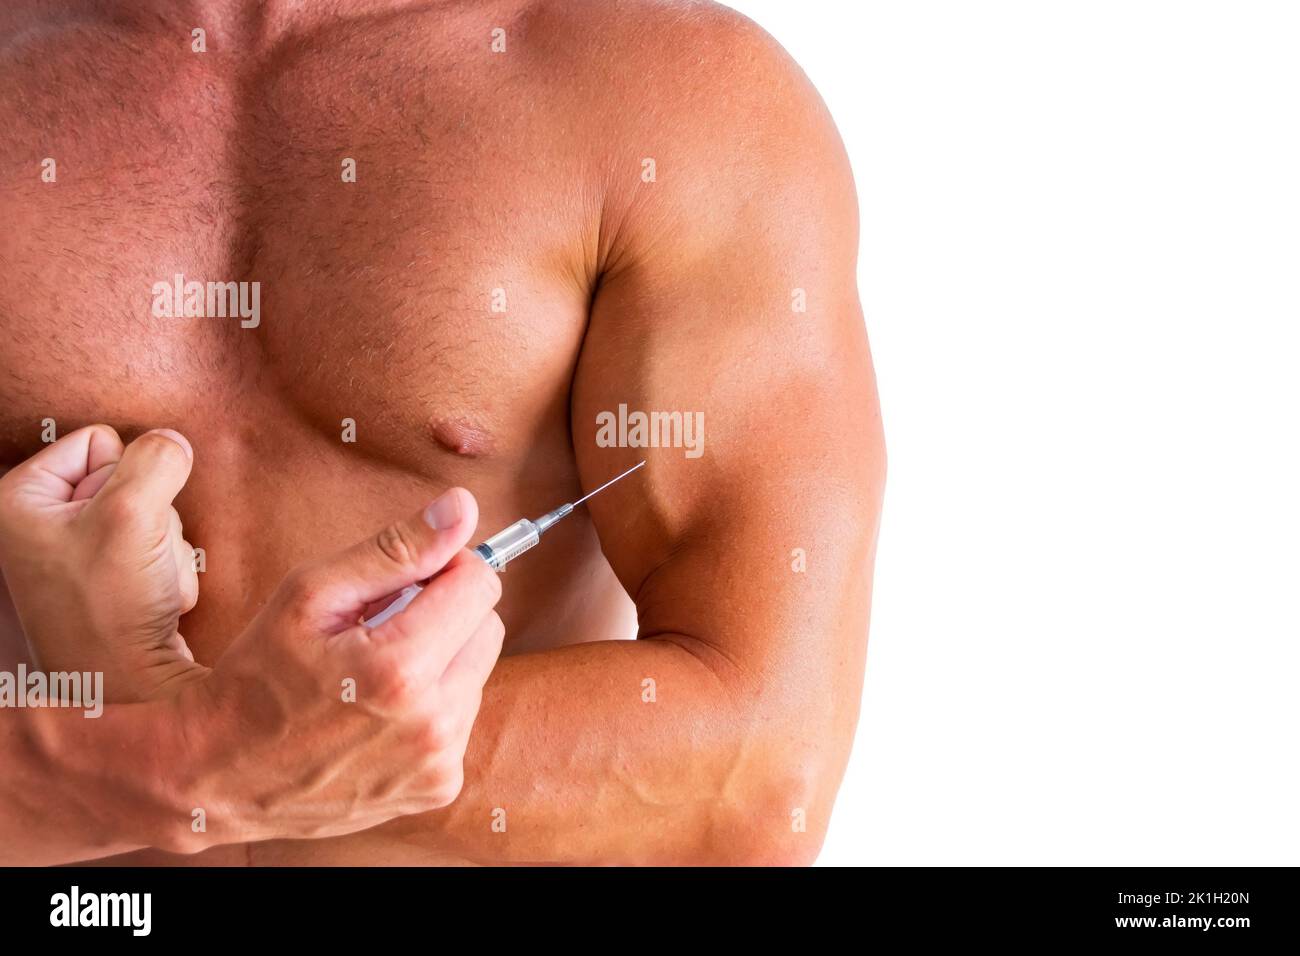 Bodybuilder holding an injection of a steroid syringe to his chest. Strong athletic rough muscular man pumps up abdominal muscles, exercising, doing f Stock Photo